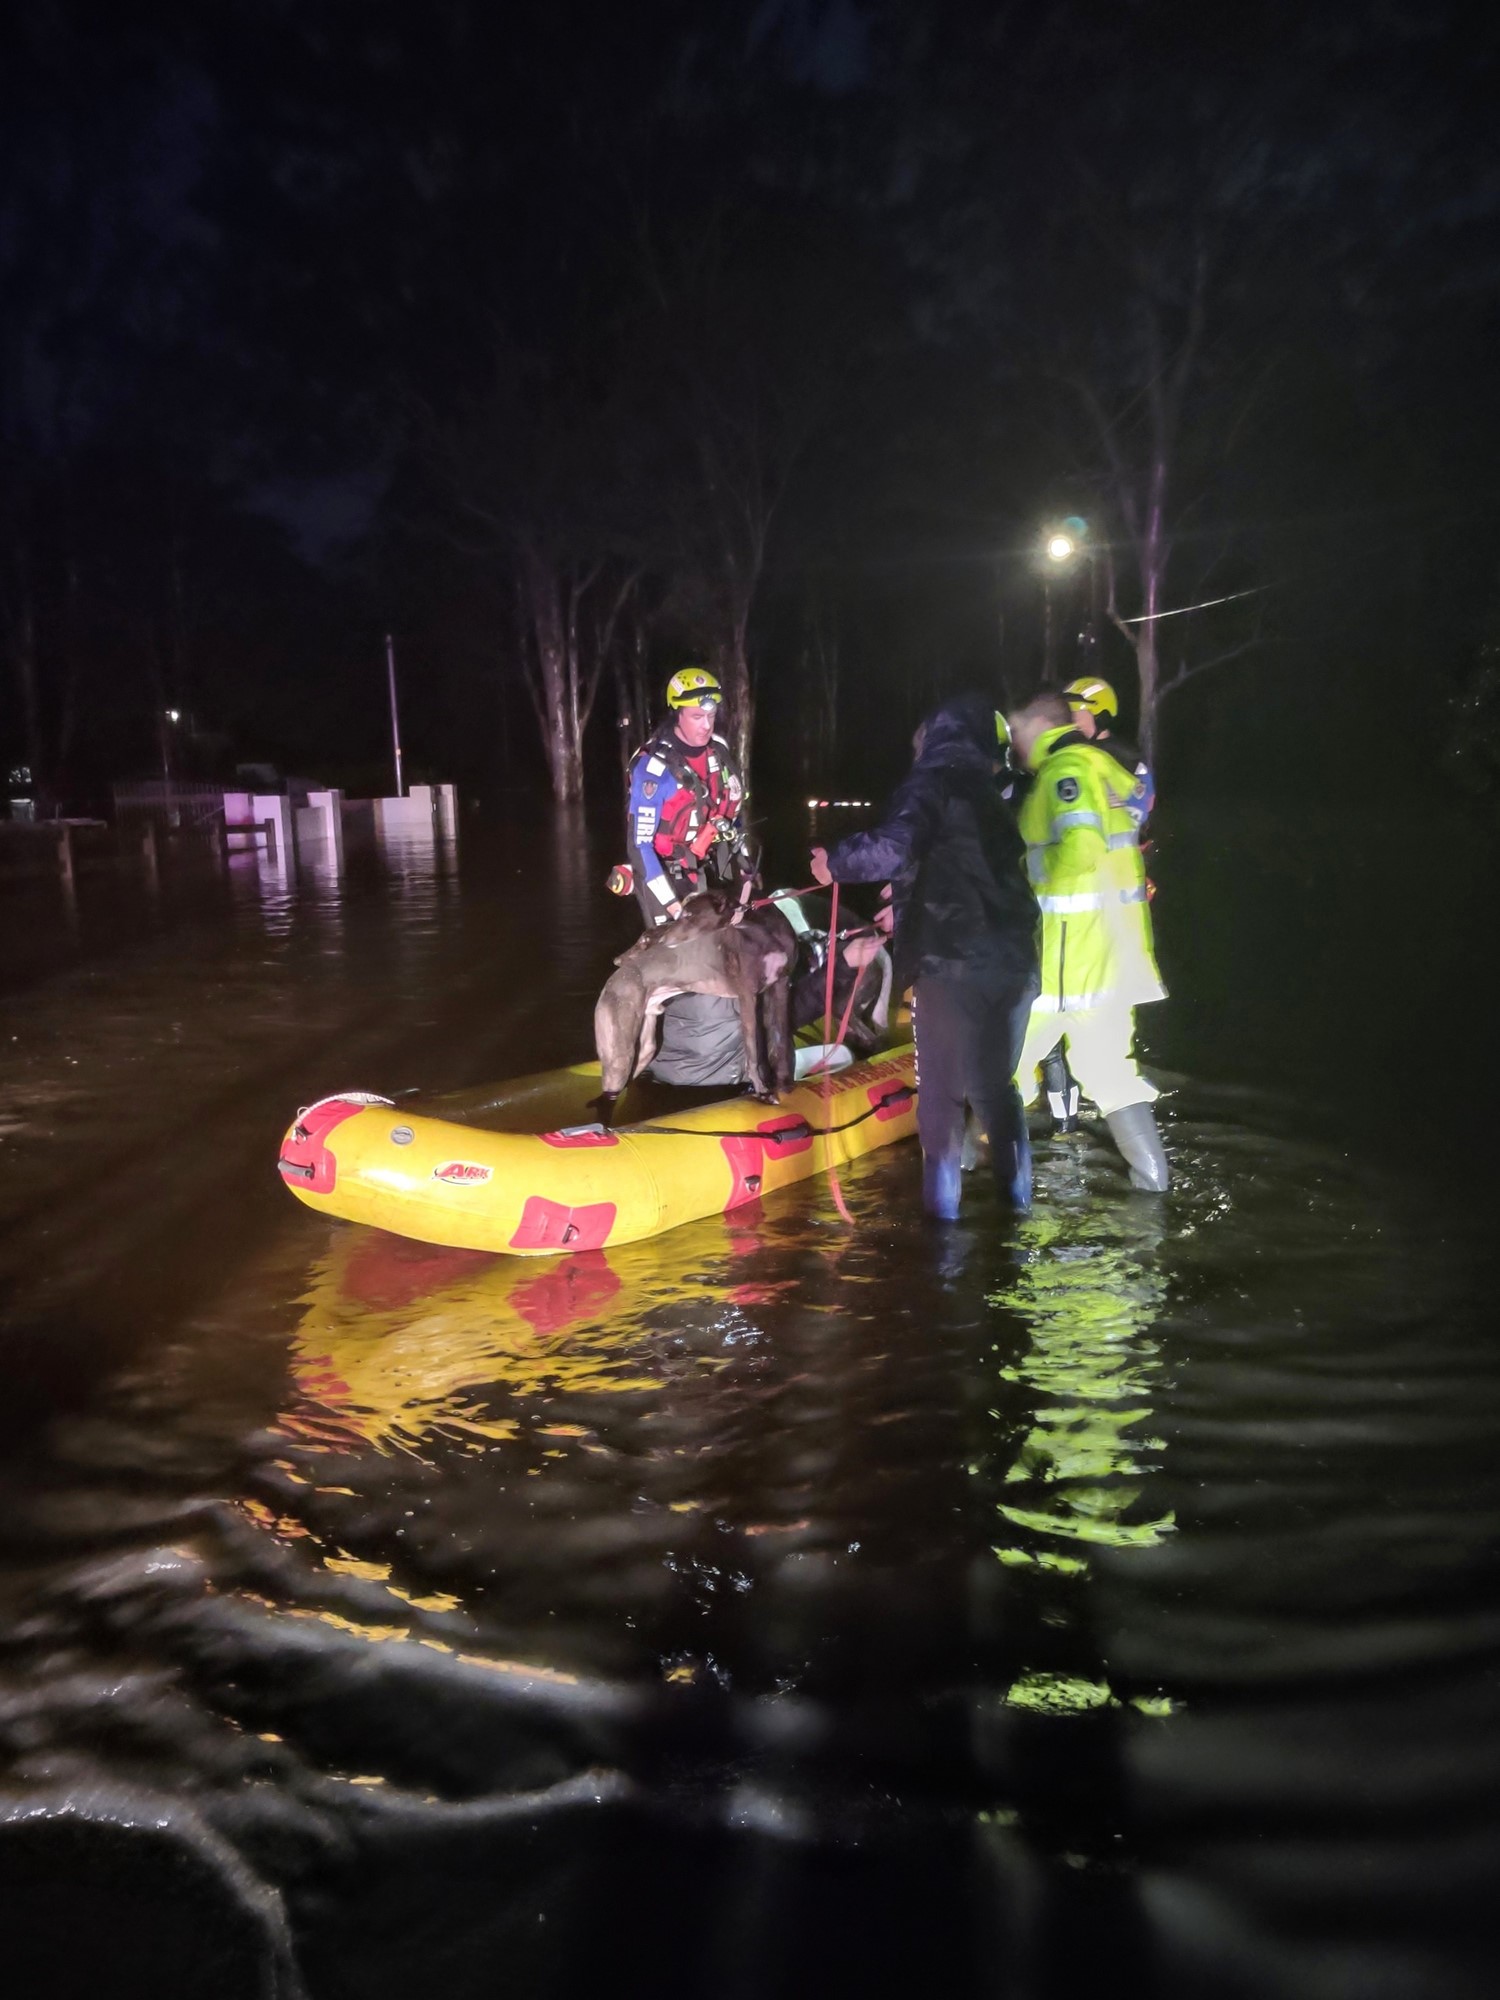 rescue crews wearing high-vis clothes help dogs on a yellow rescue boat in flood waters